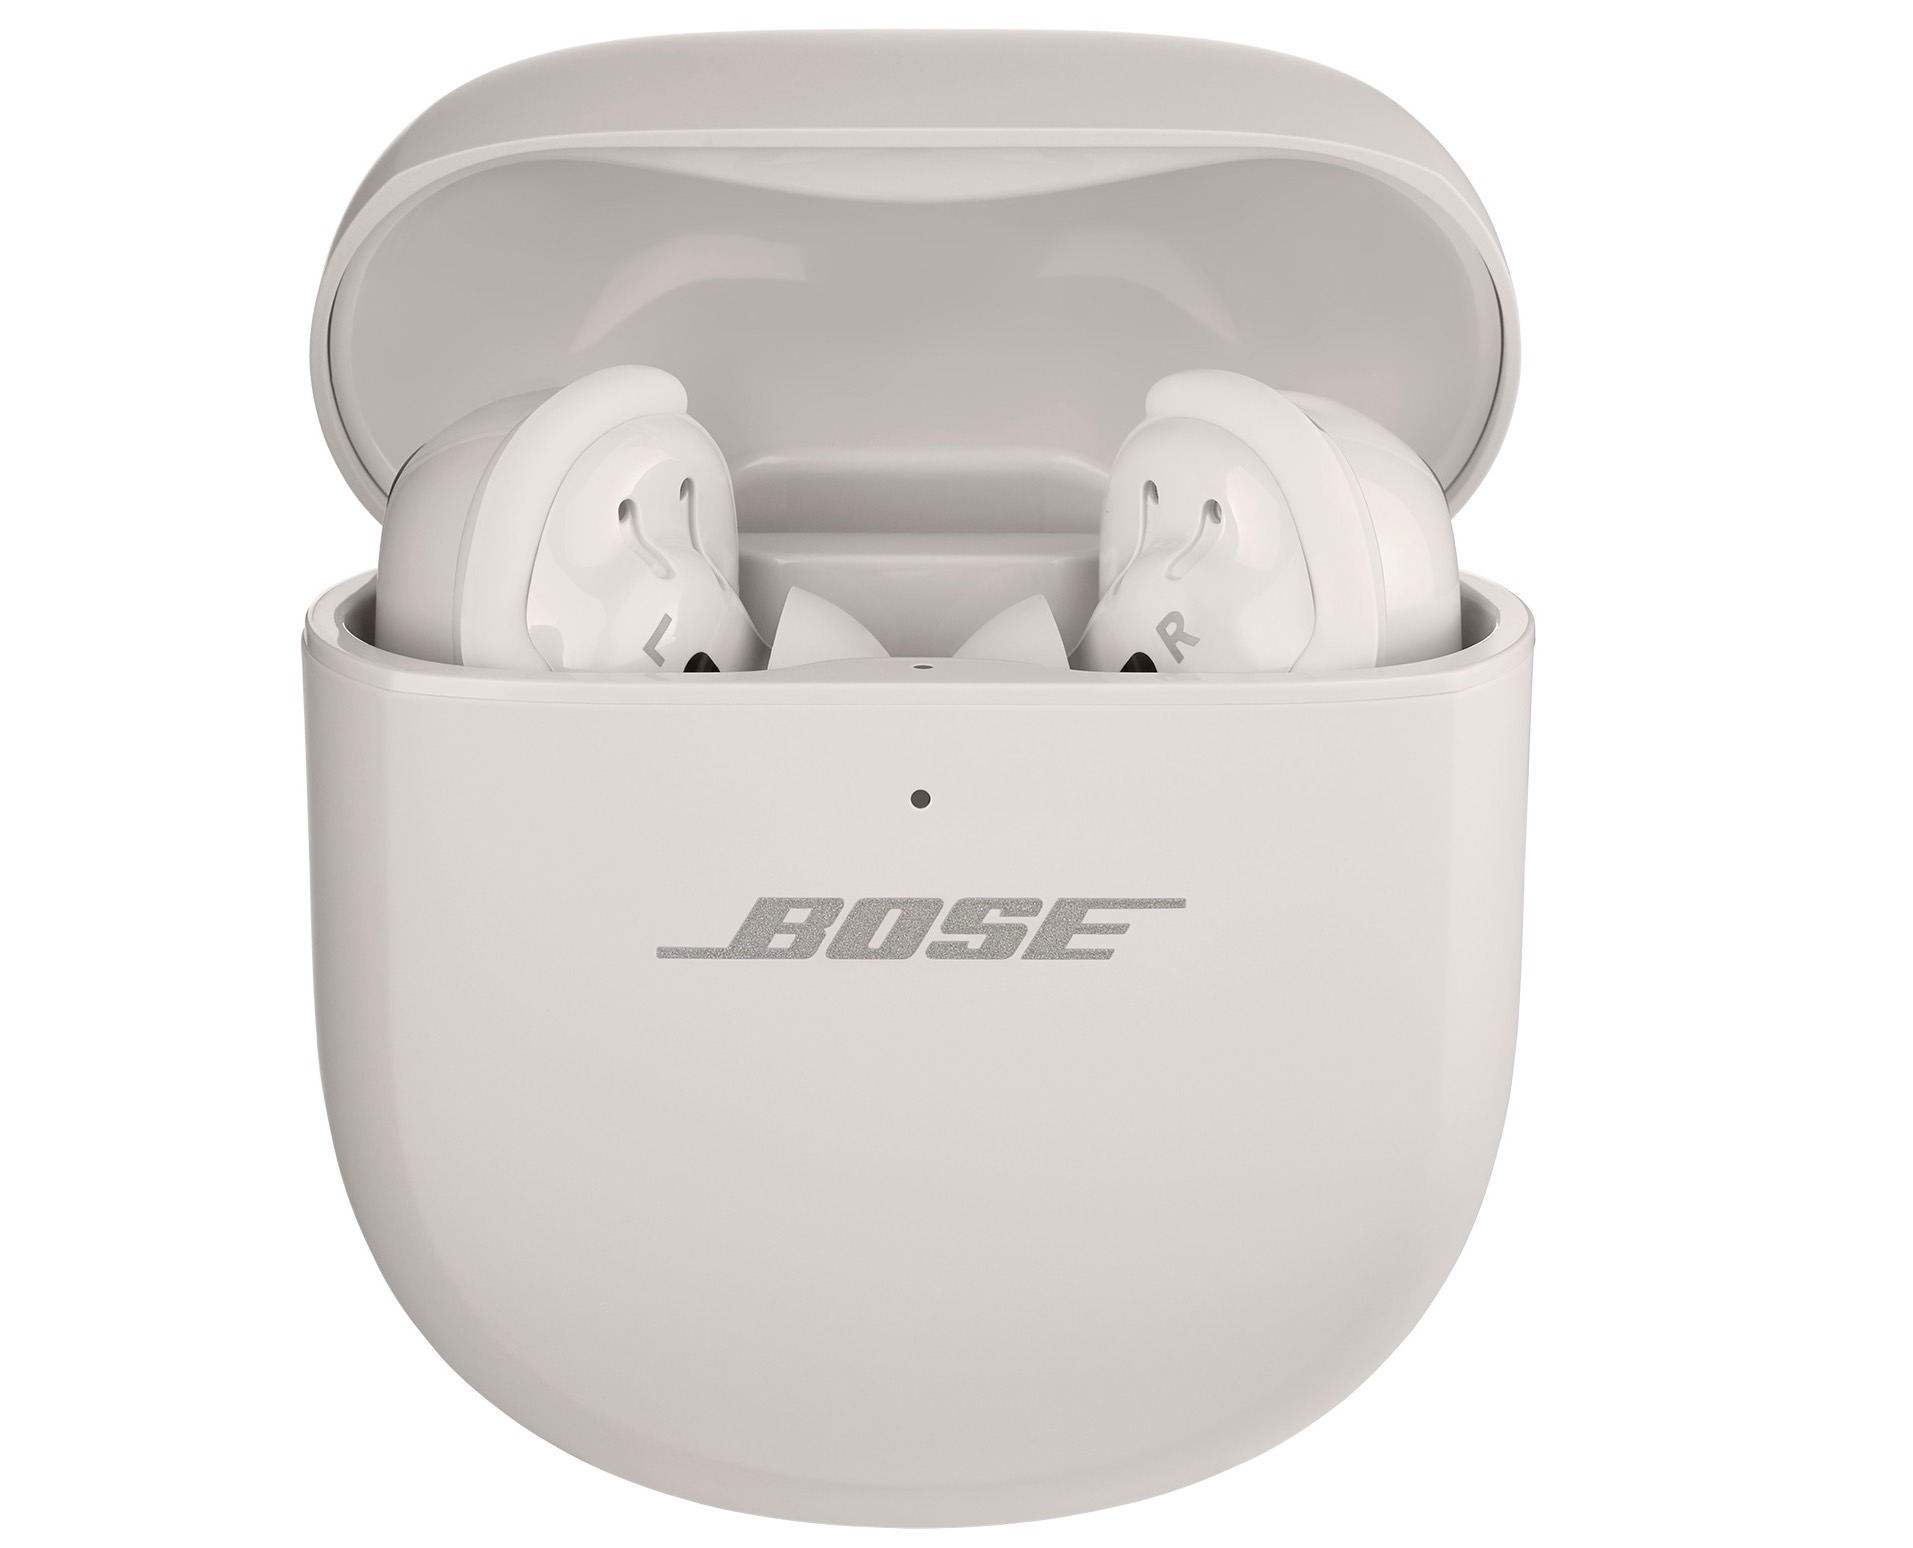 Bose QuietComfort Ultra Earbuds in white, sitting in charging case.